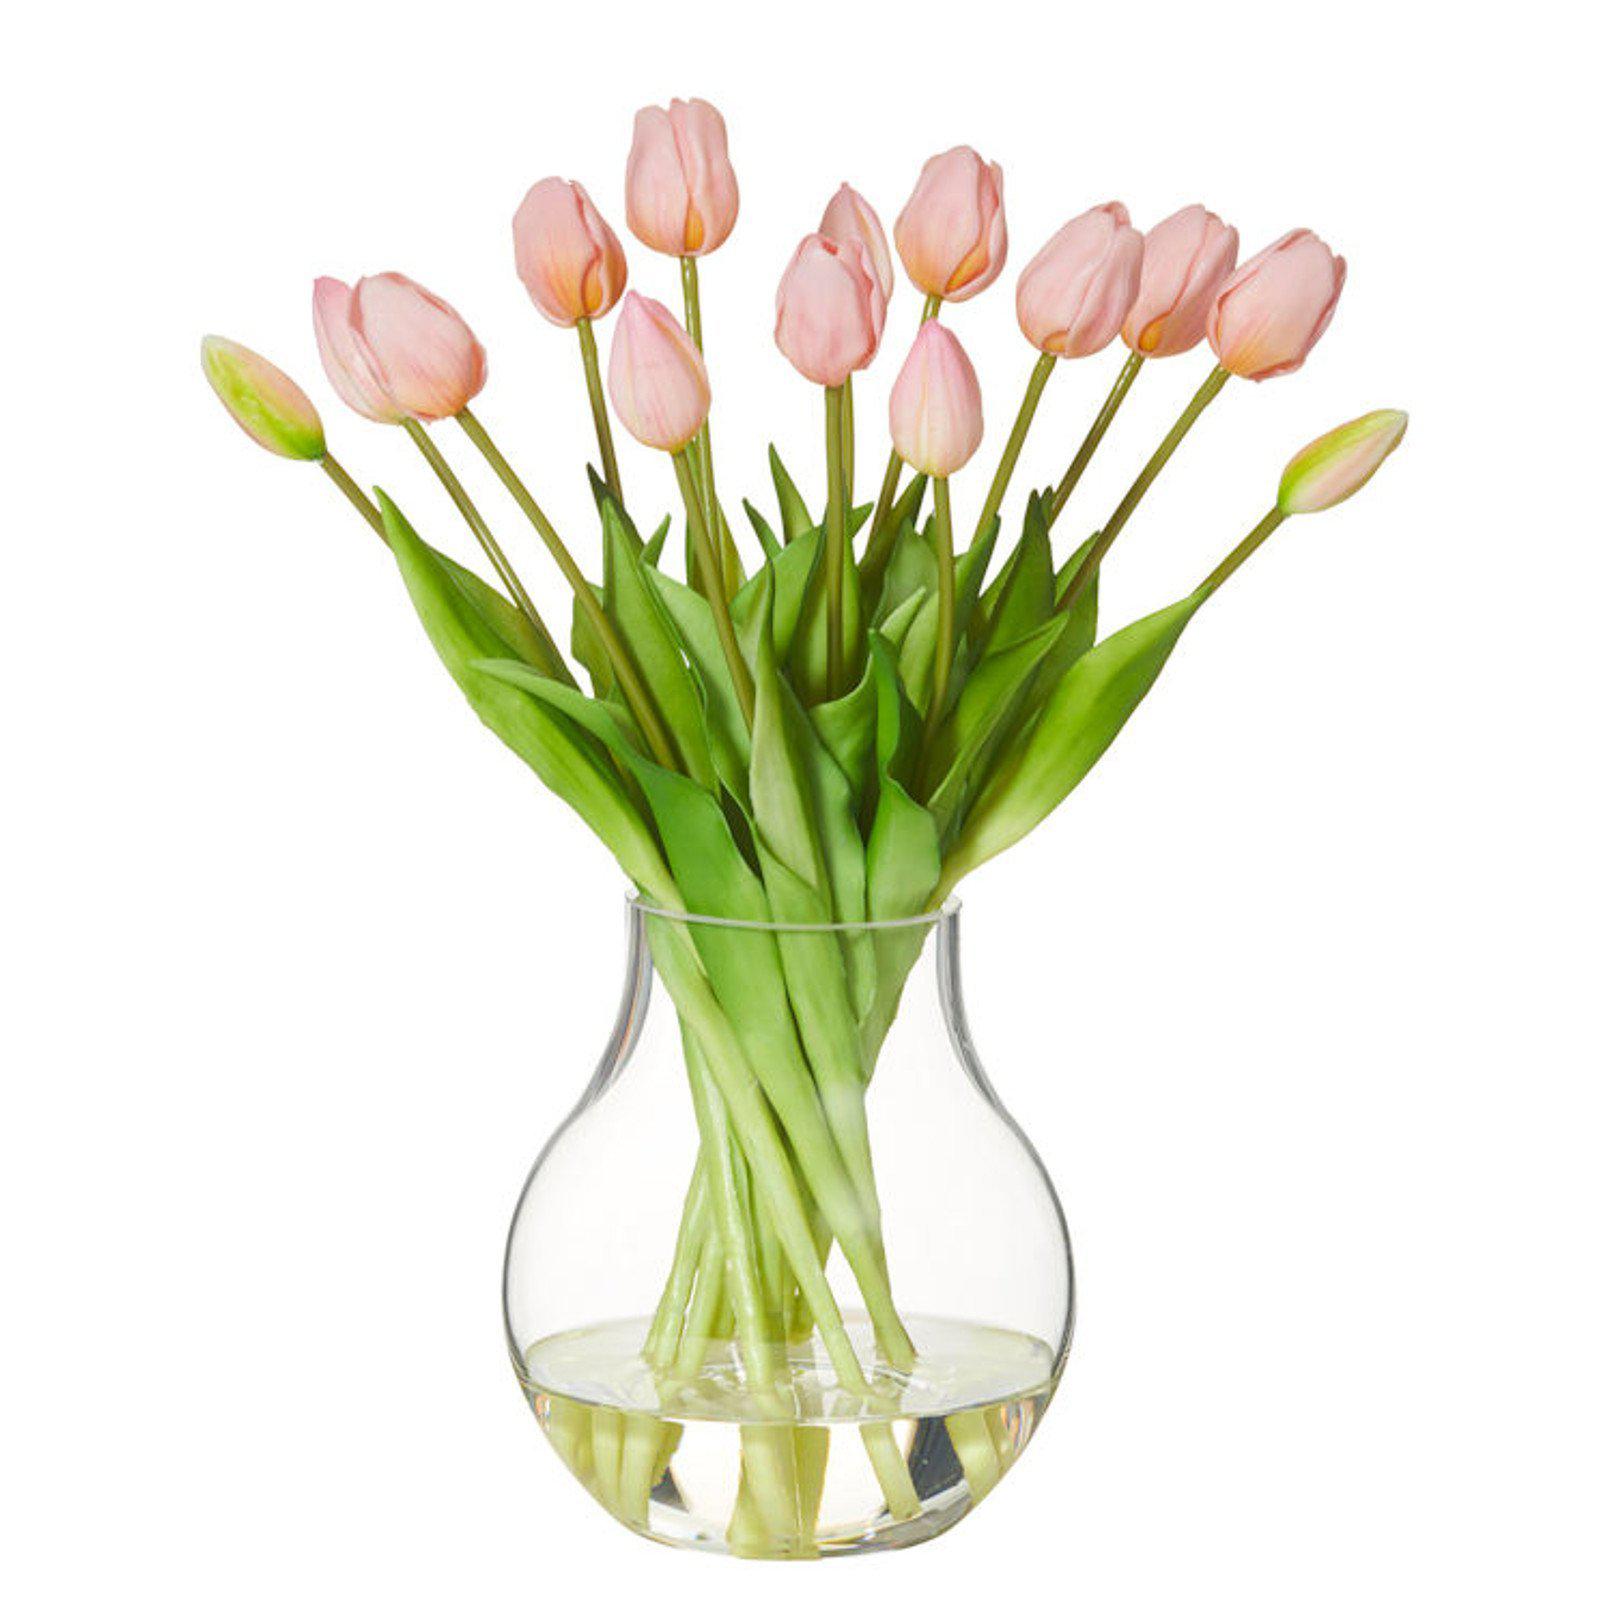 Mini Tulip Bouquet With Aria Vase - Artificial Floral Arrangement Yellow/White/Pink-artificial flowers and plants-Chef's Quality Cookware